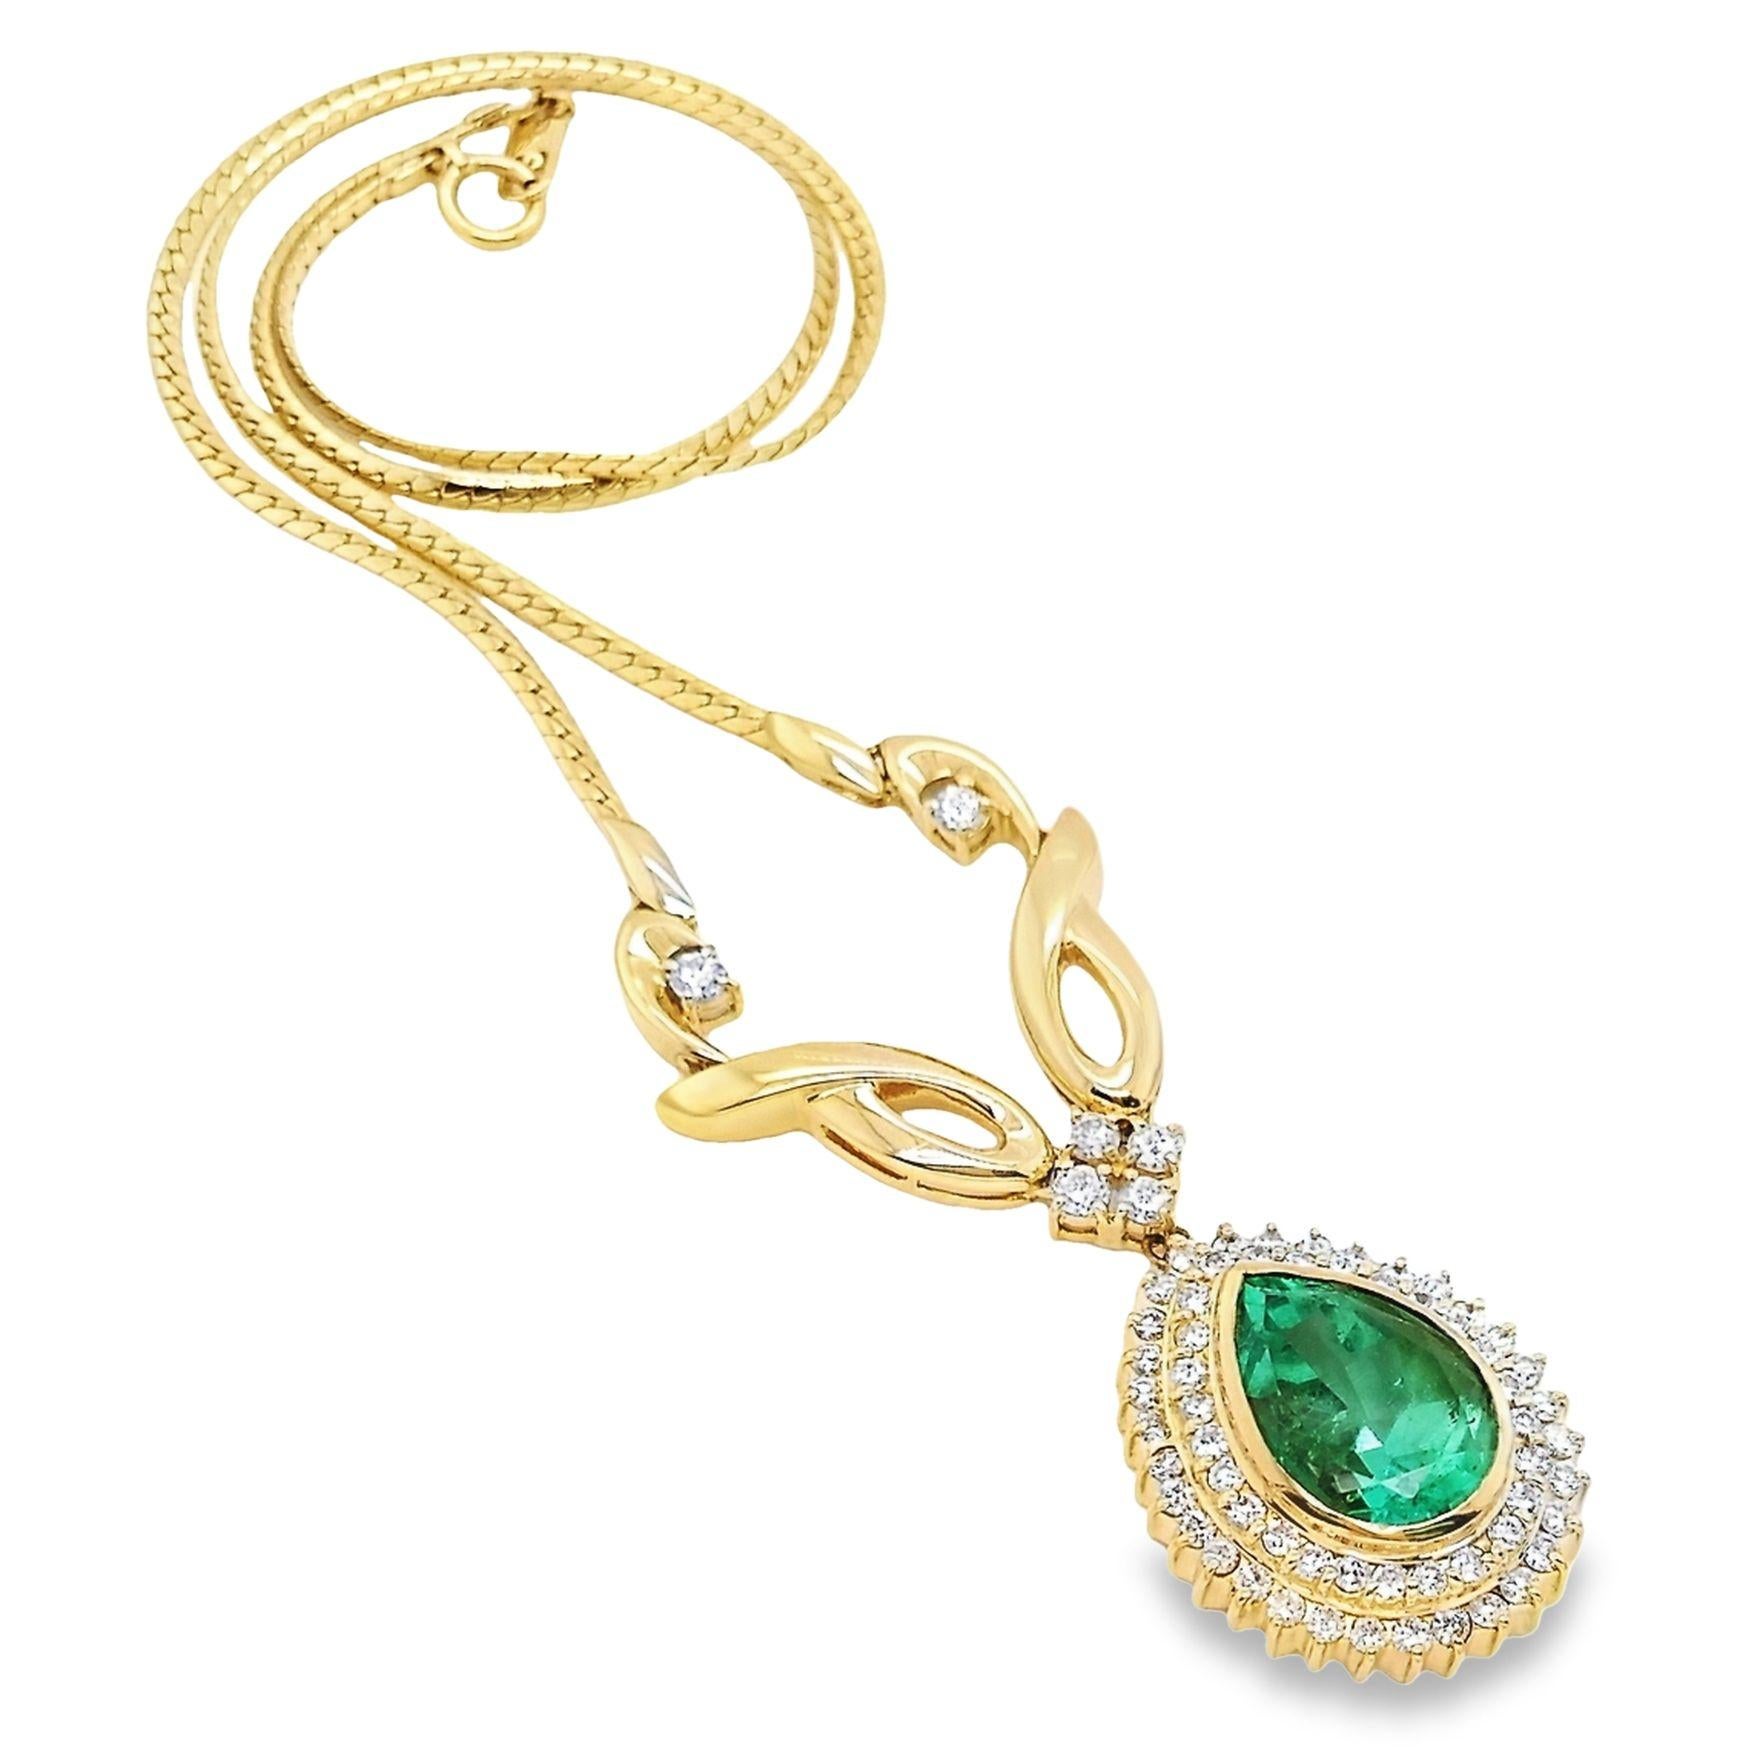 IGI Certified 5.14ct Colombia Emerald 1.46ct Diamonds 18K Yellow Gold Necklace In New Condition For Sale In Hong Kong, HK